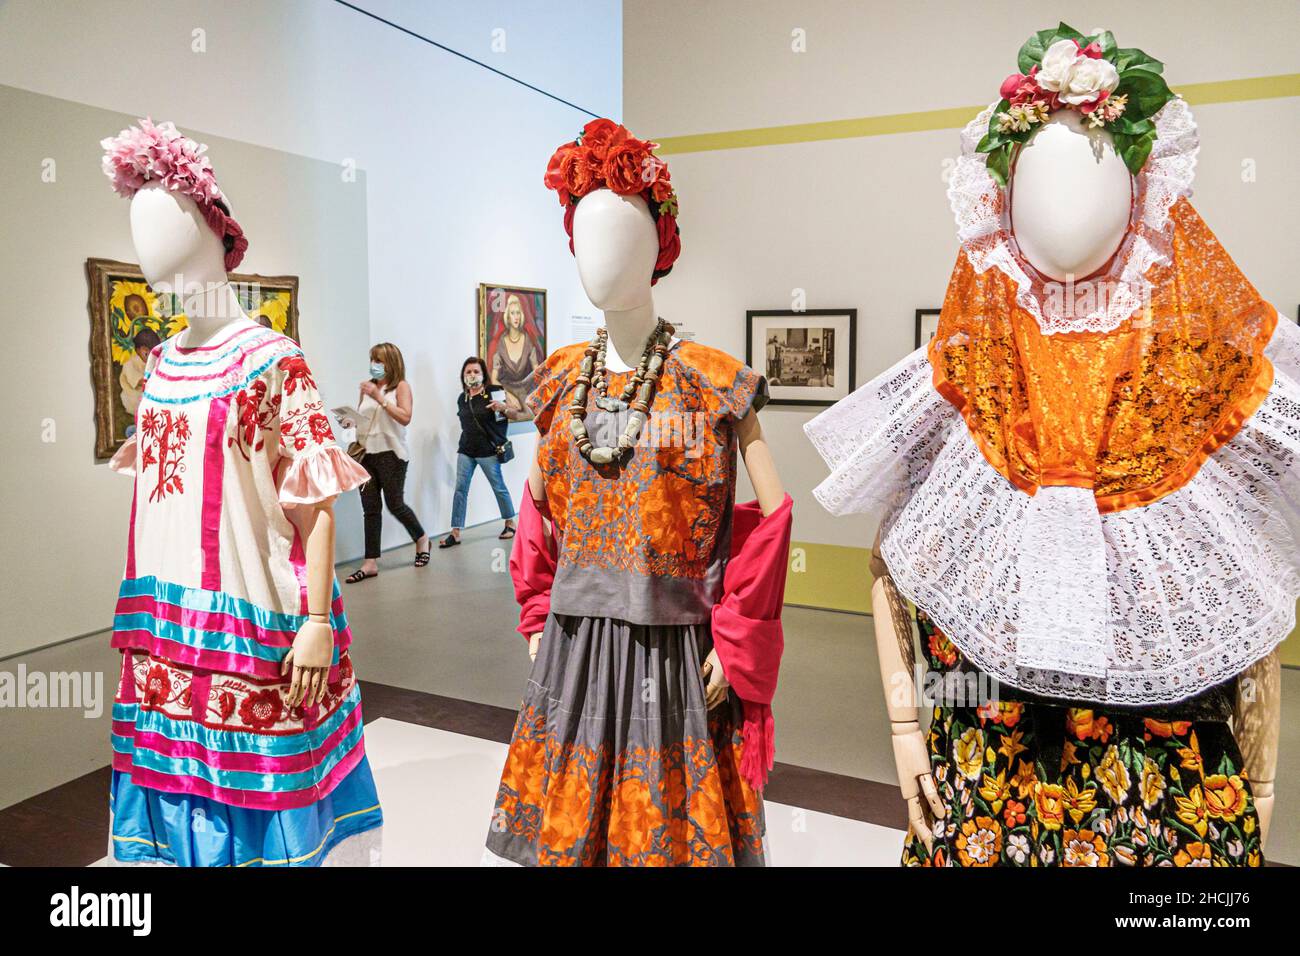 West Palm Beach Florida Norton Museum of Art inside interior collection  exhibit gallery artwork Frida Kahlo exhibition clothing dress dresses  wearing Stock Photo - Alamy